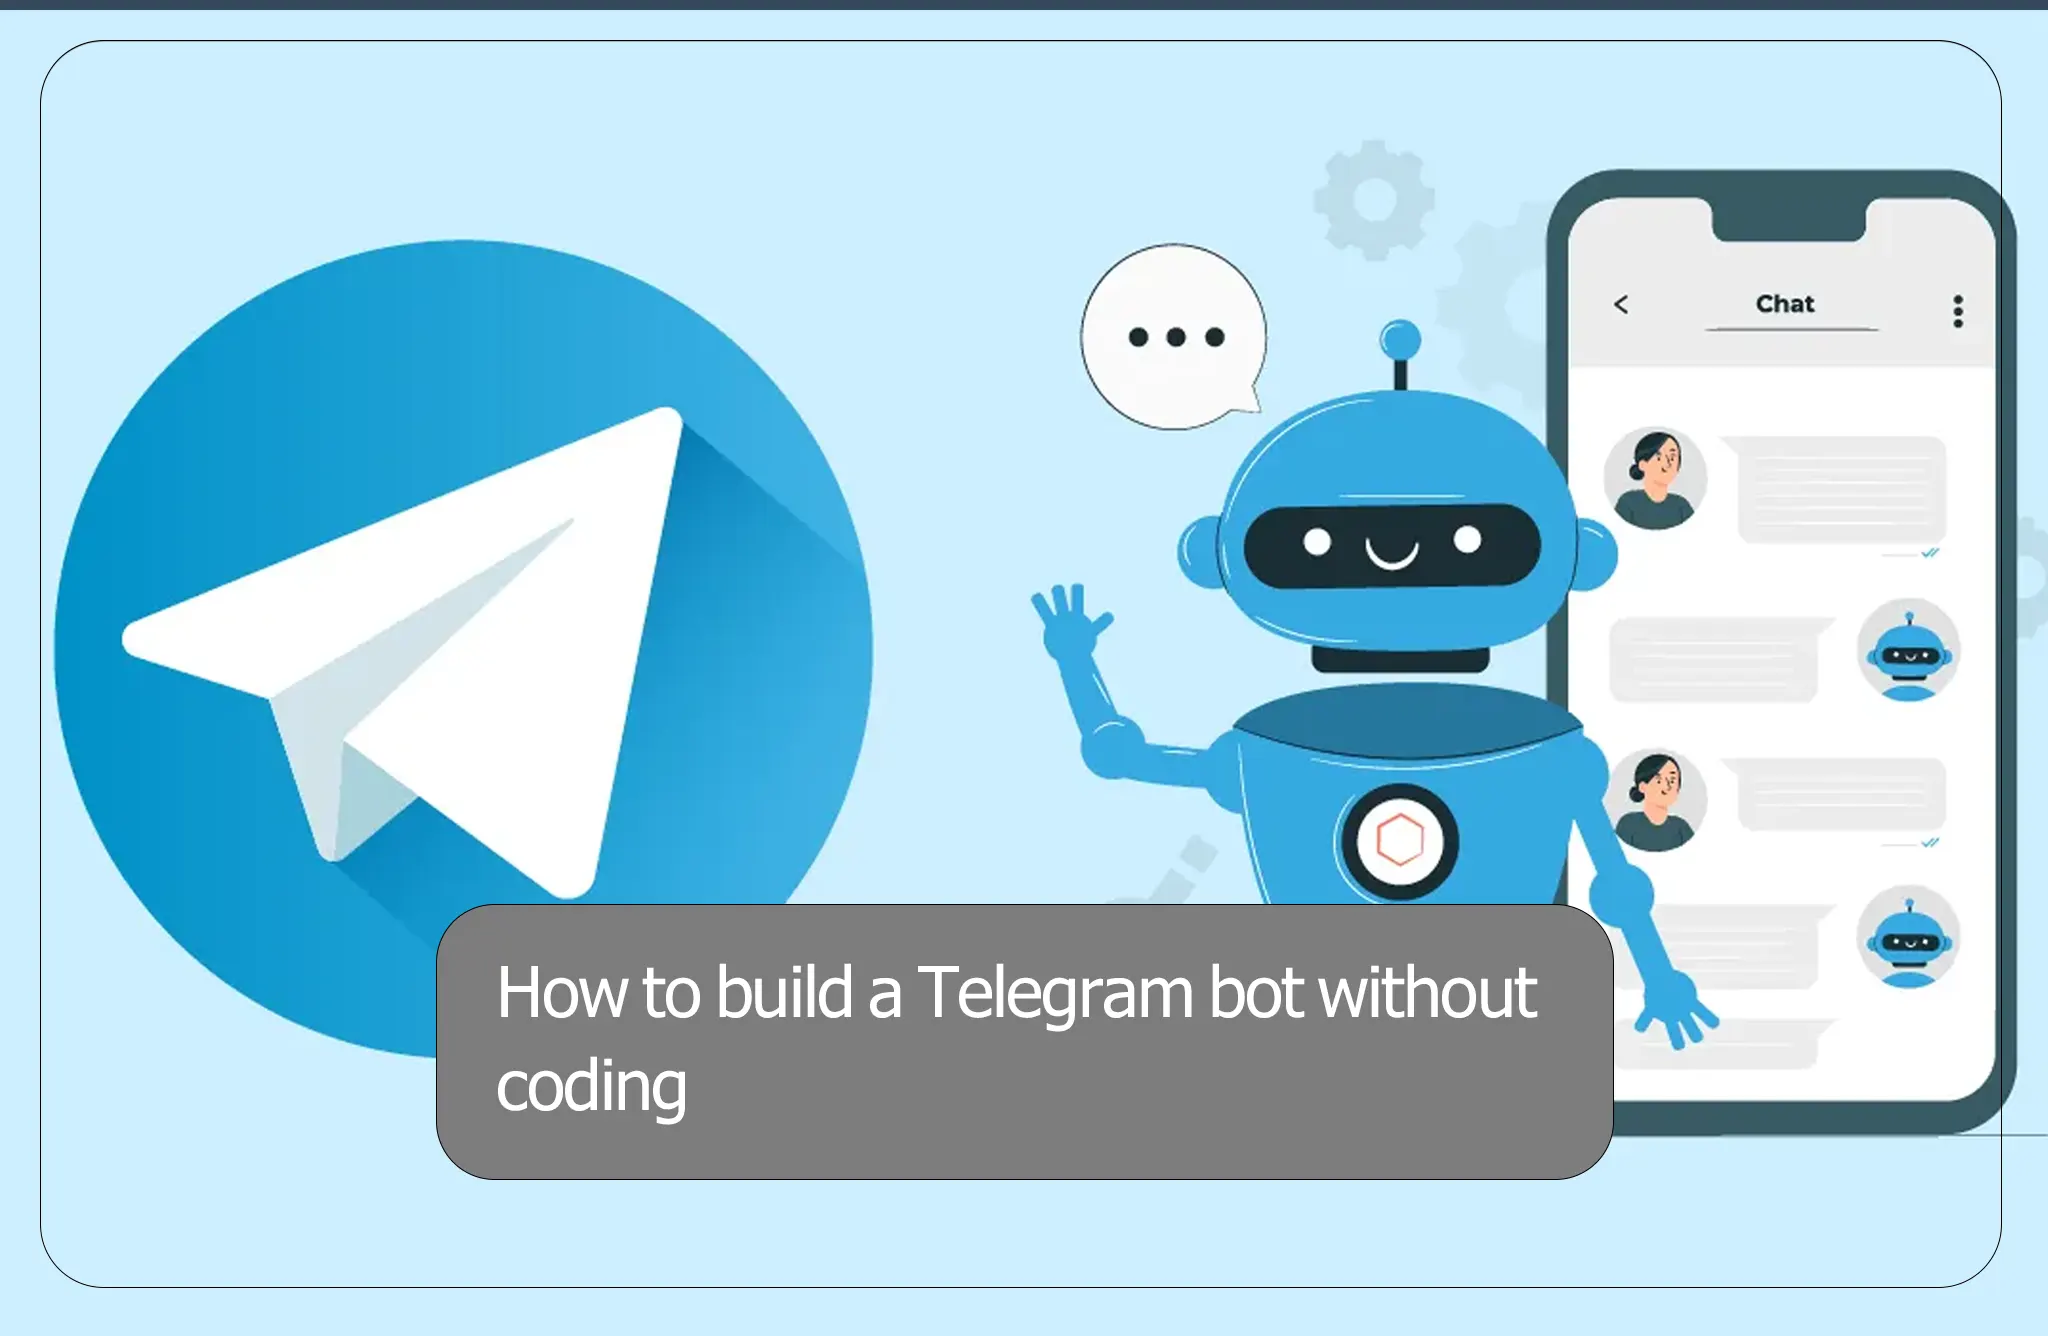 How to build a Telegram bot without coding